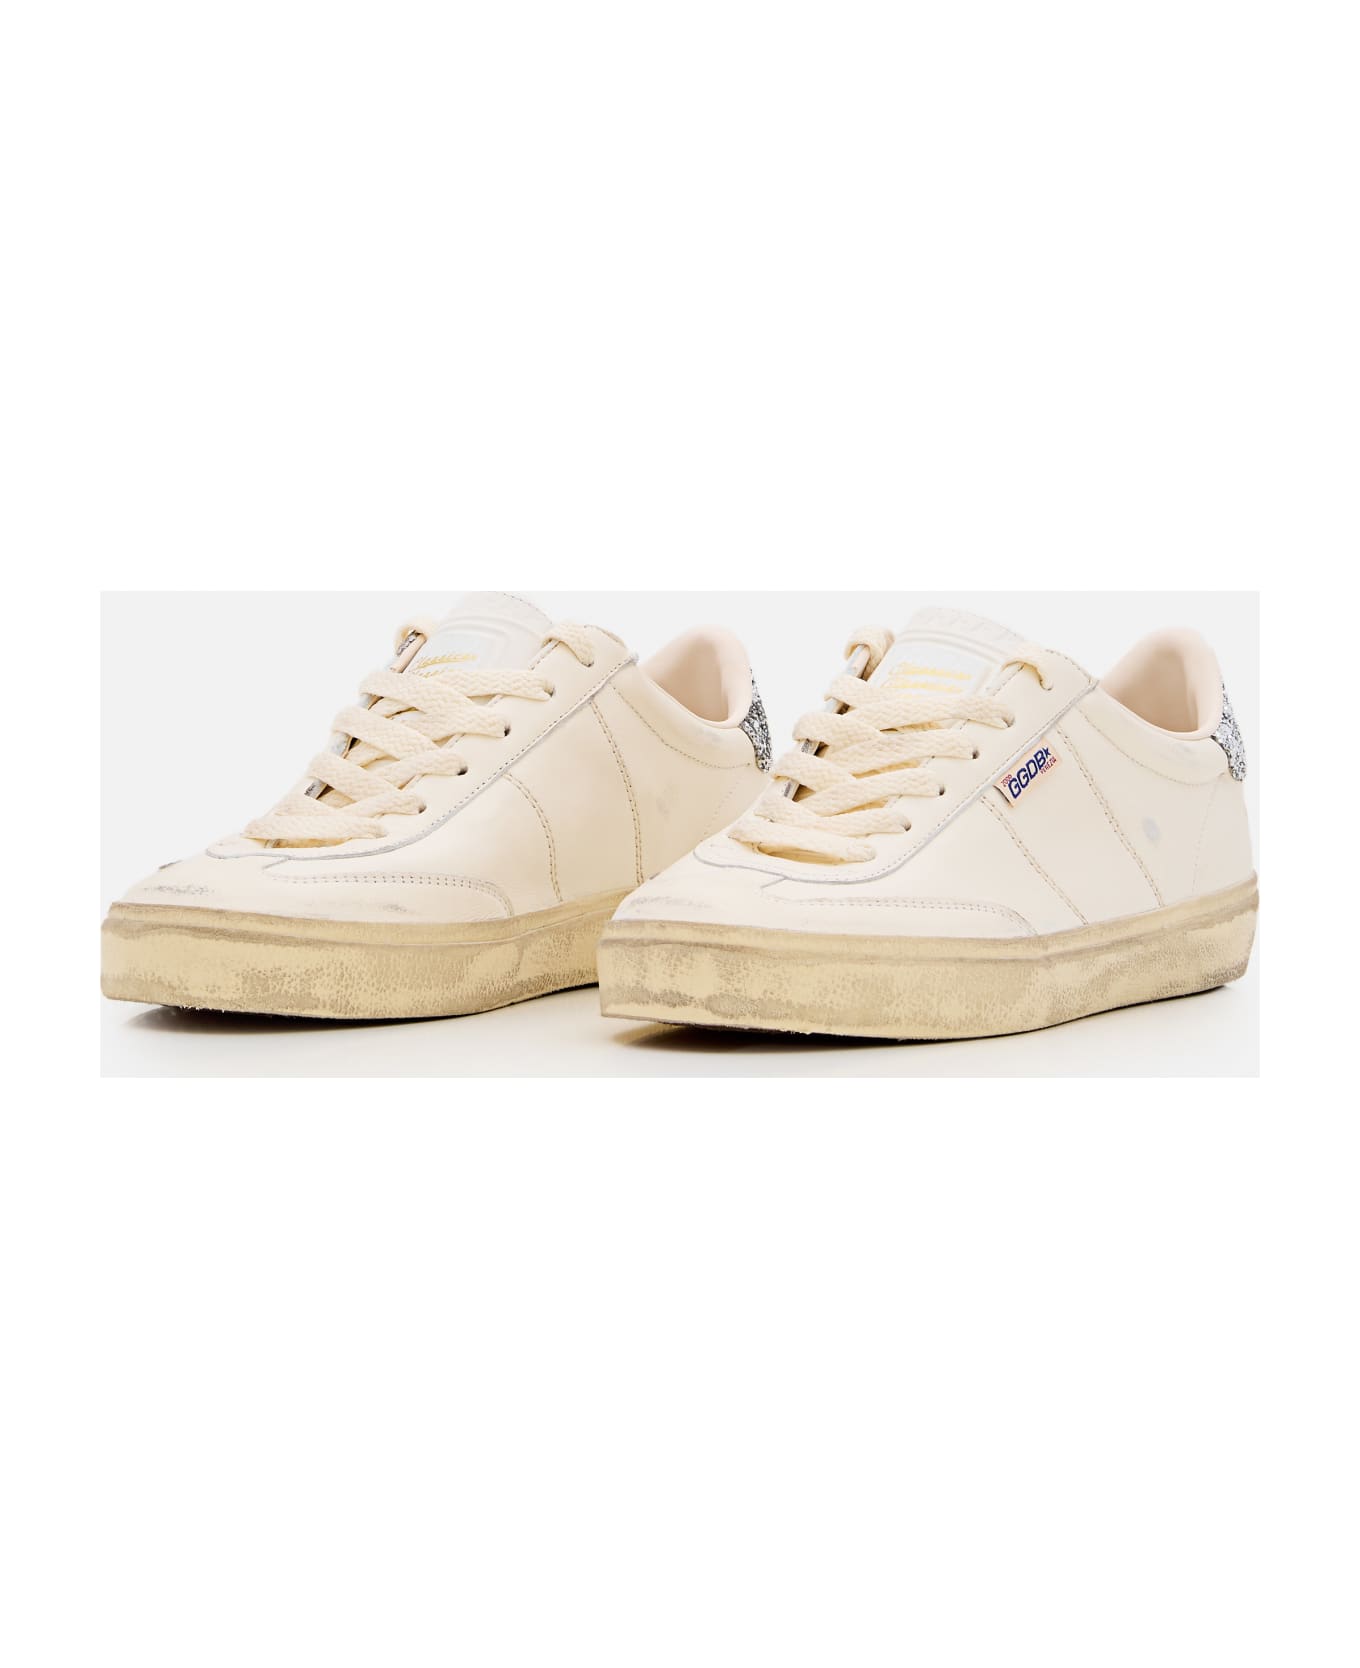 Golden Goose Soul Star Distressed Glittered Lace-up lilac - White/Silver